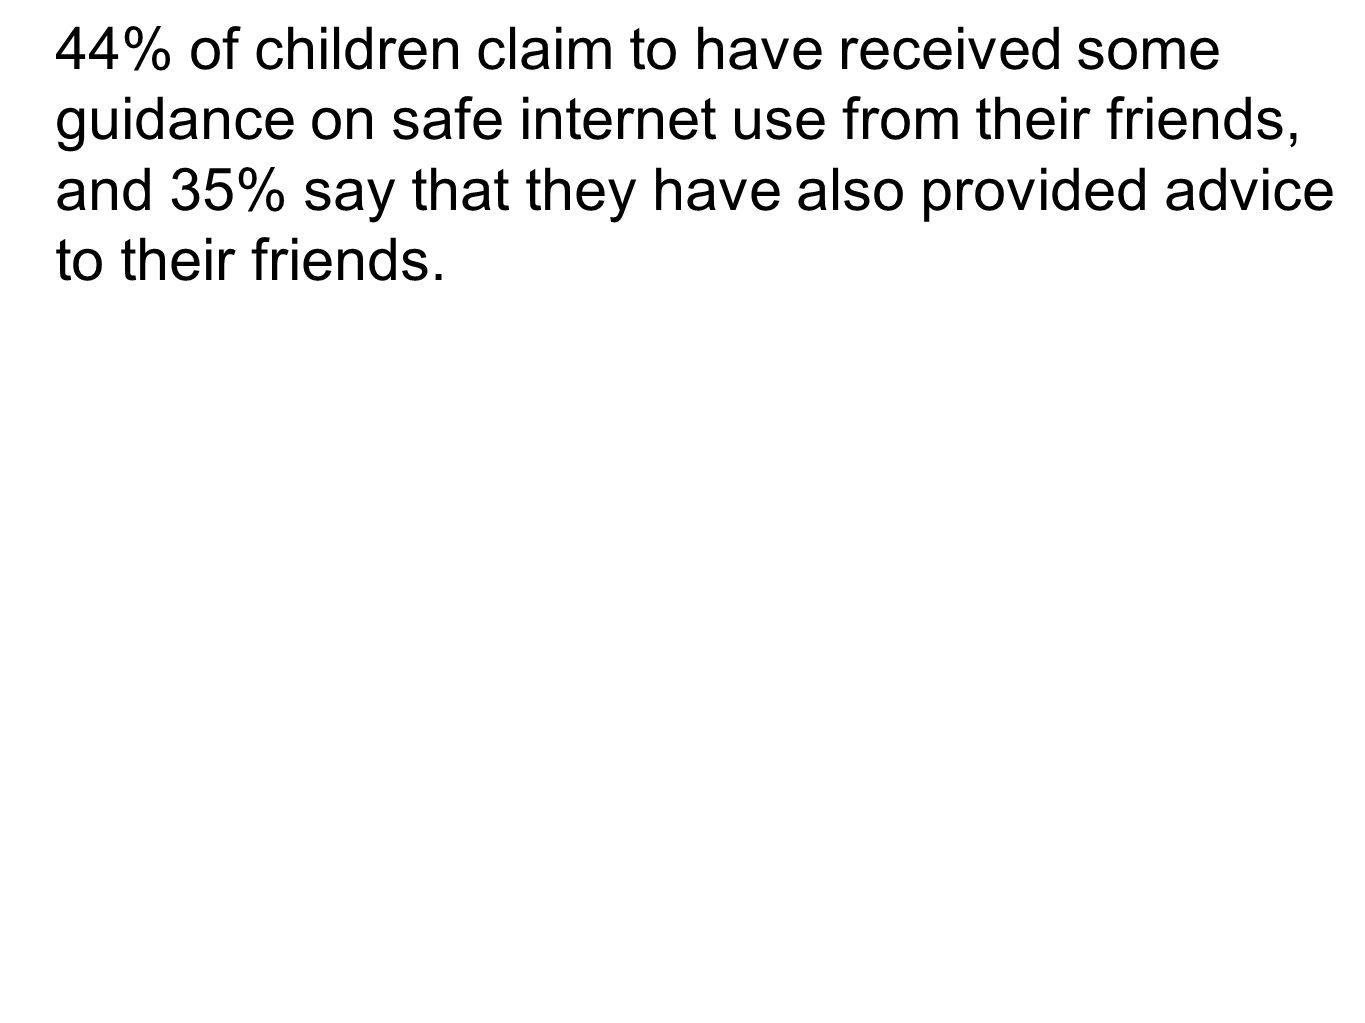 44% of children claim to have received some guidance on safe internet use from their friends, and 35% say that they have also provided advice to their friends.